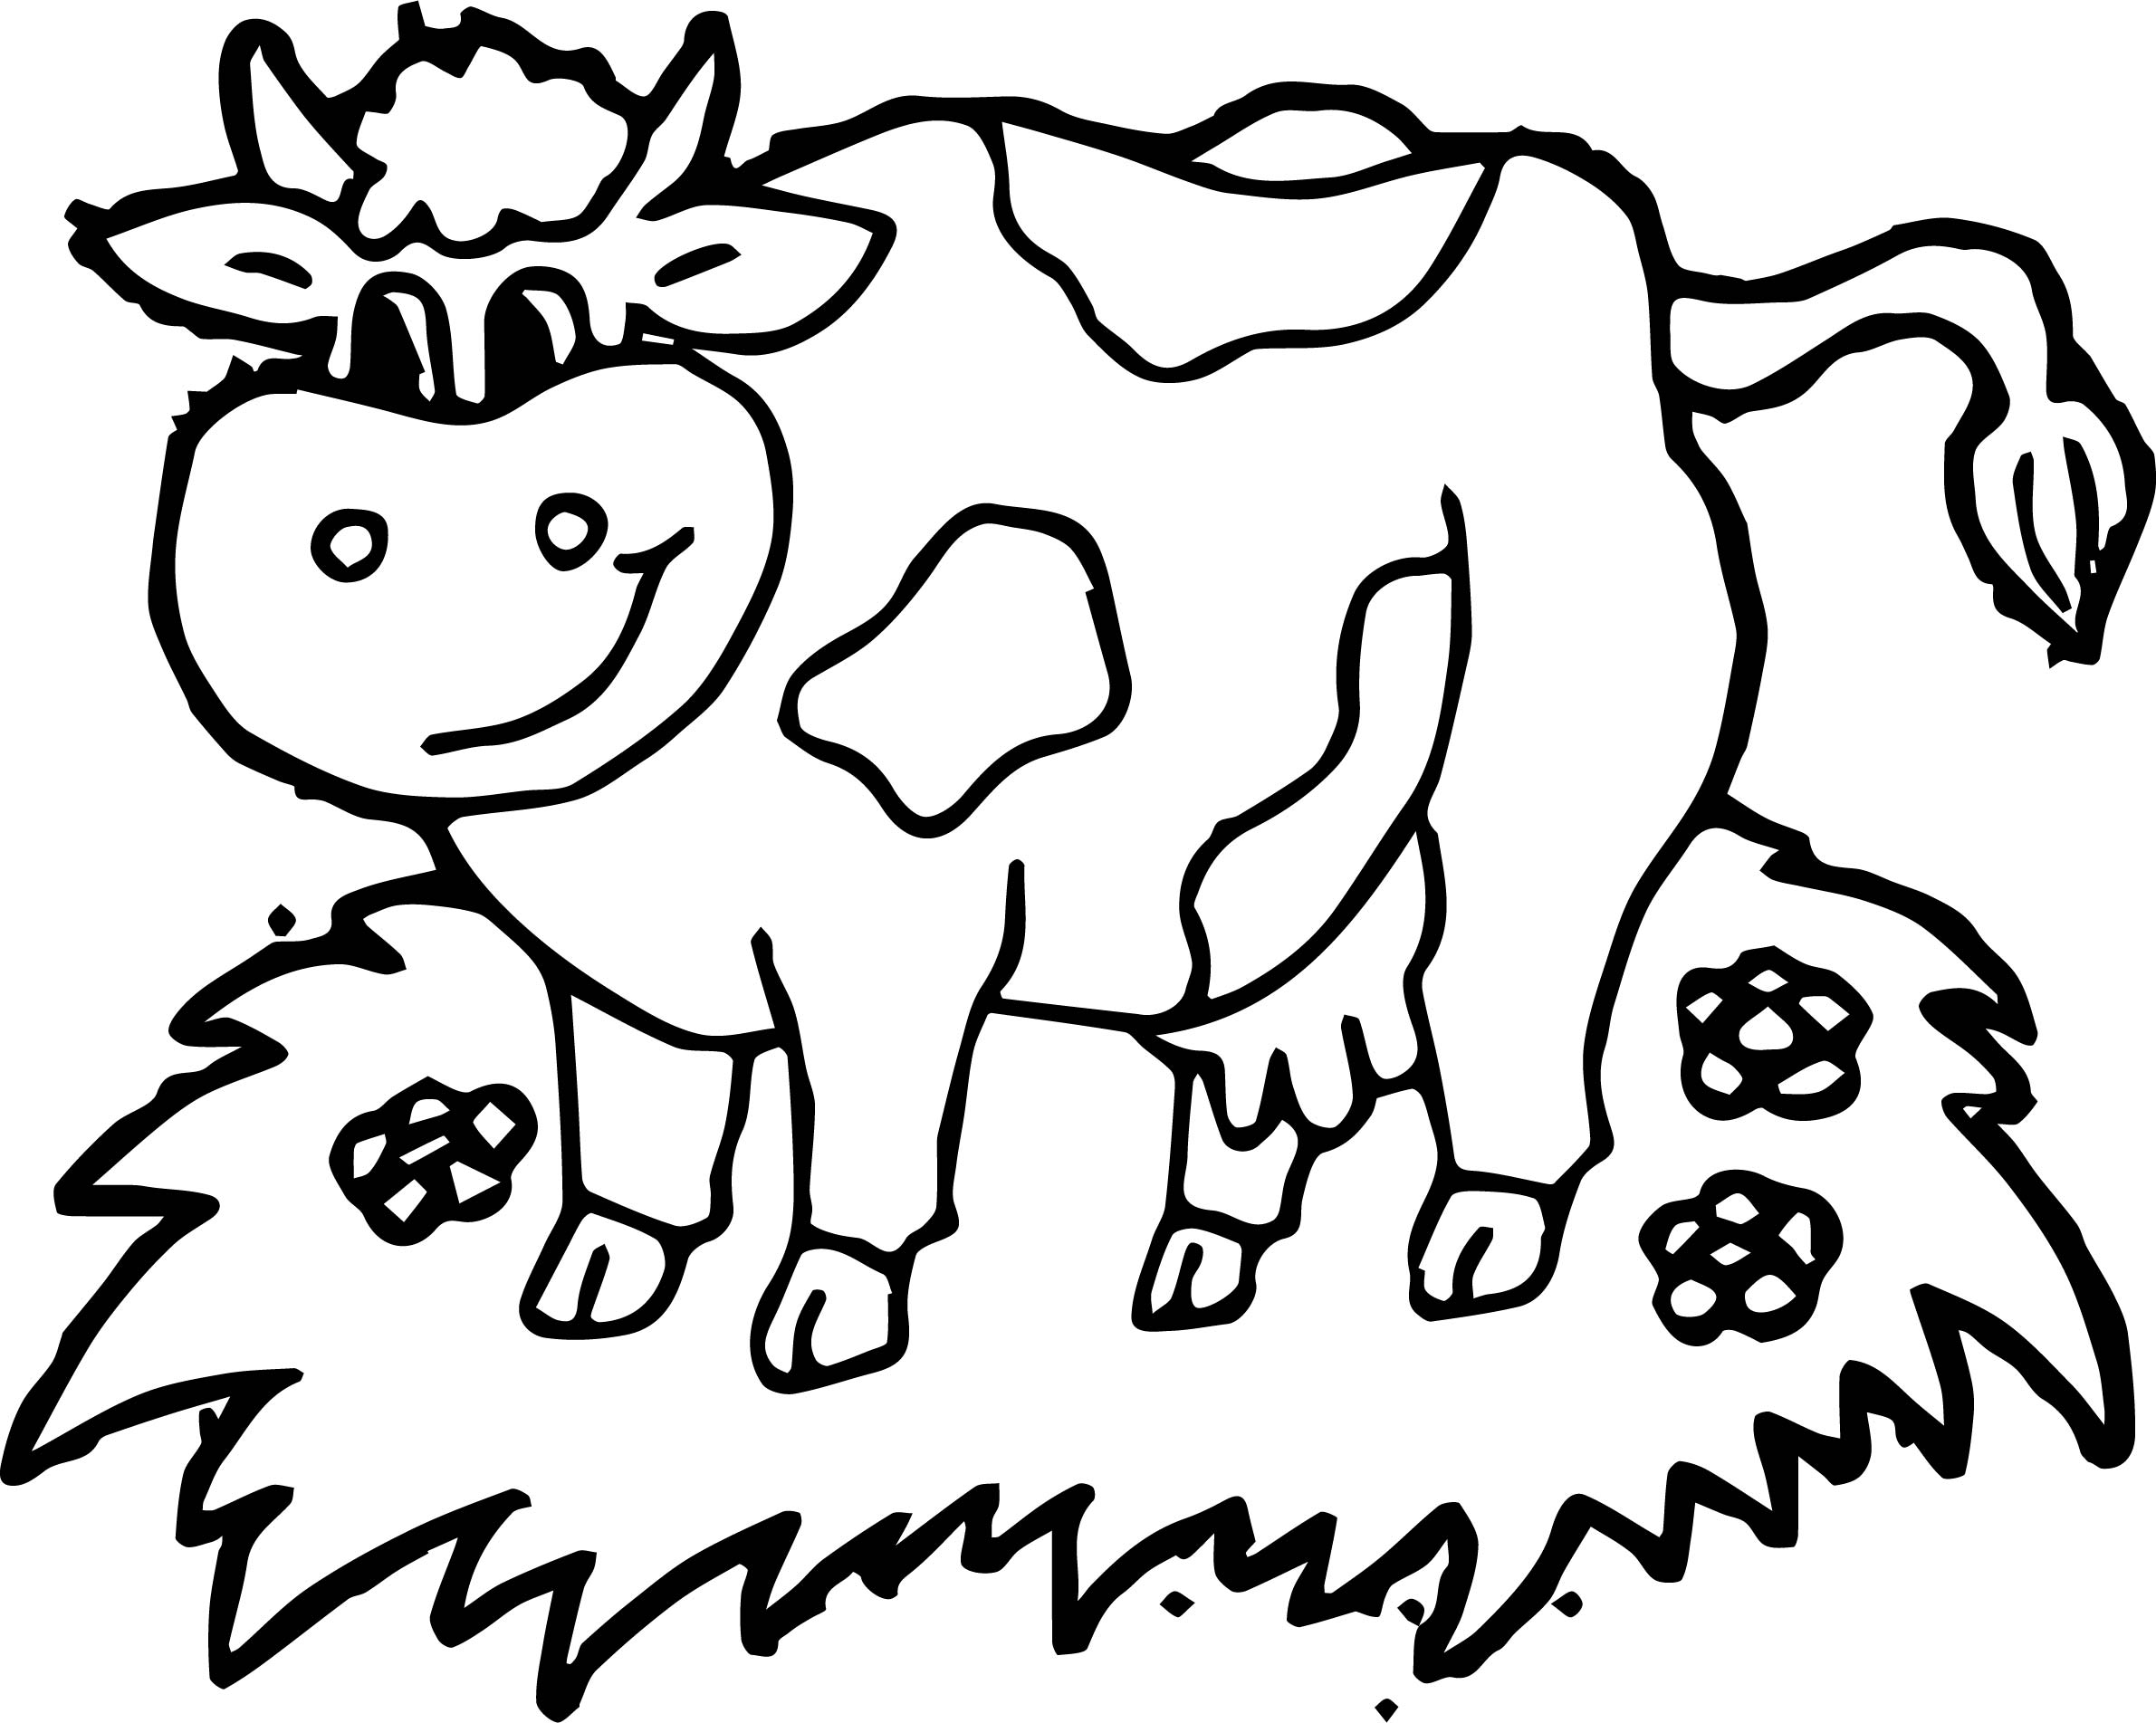 Cow Head Coloring Page at GetColorings.com | Free printable colorings